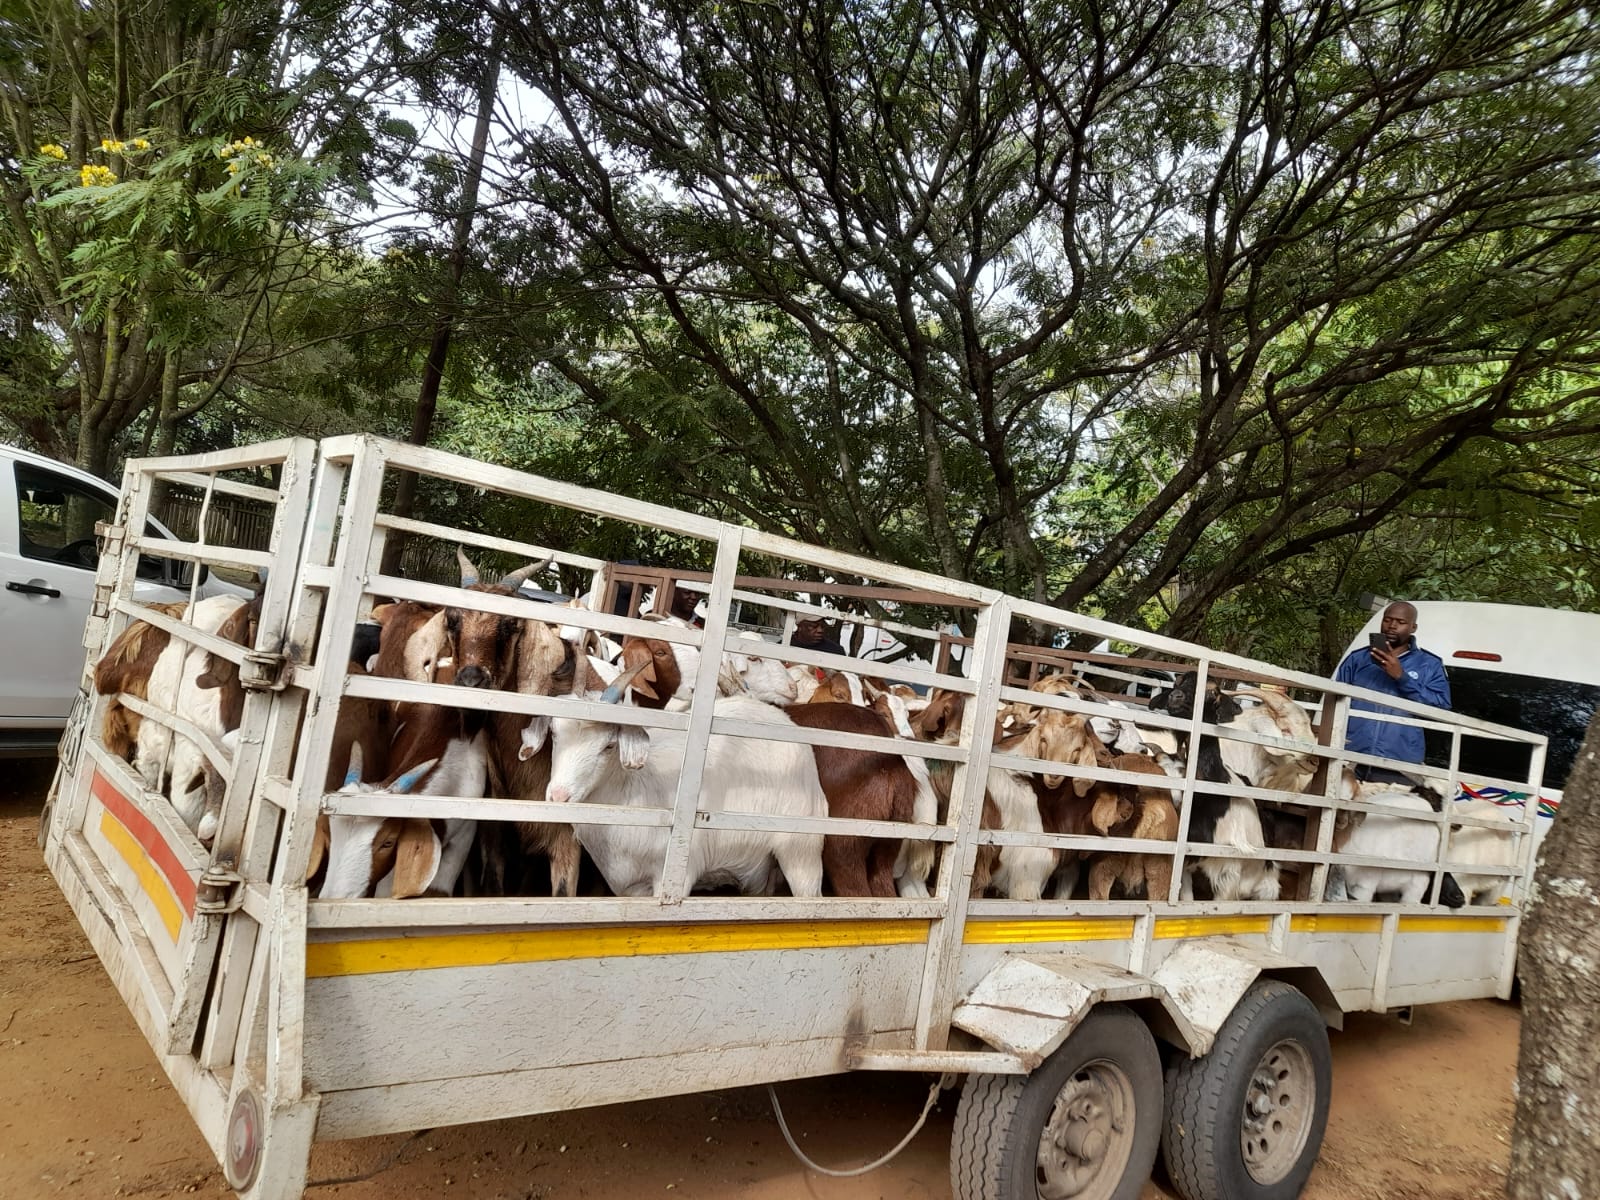 A FOREIGN NATIONAL APPREHENDED FOR TRANSPORTATION AND POSSESSION STOLEN SHEEP AND GOATS IN VHEMBE DISTRICT